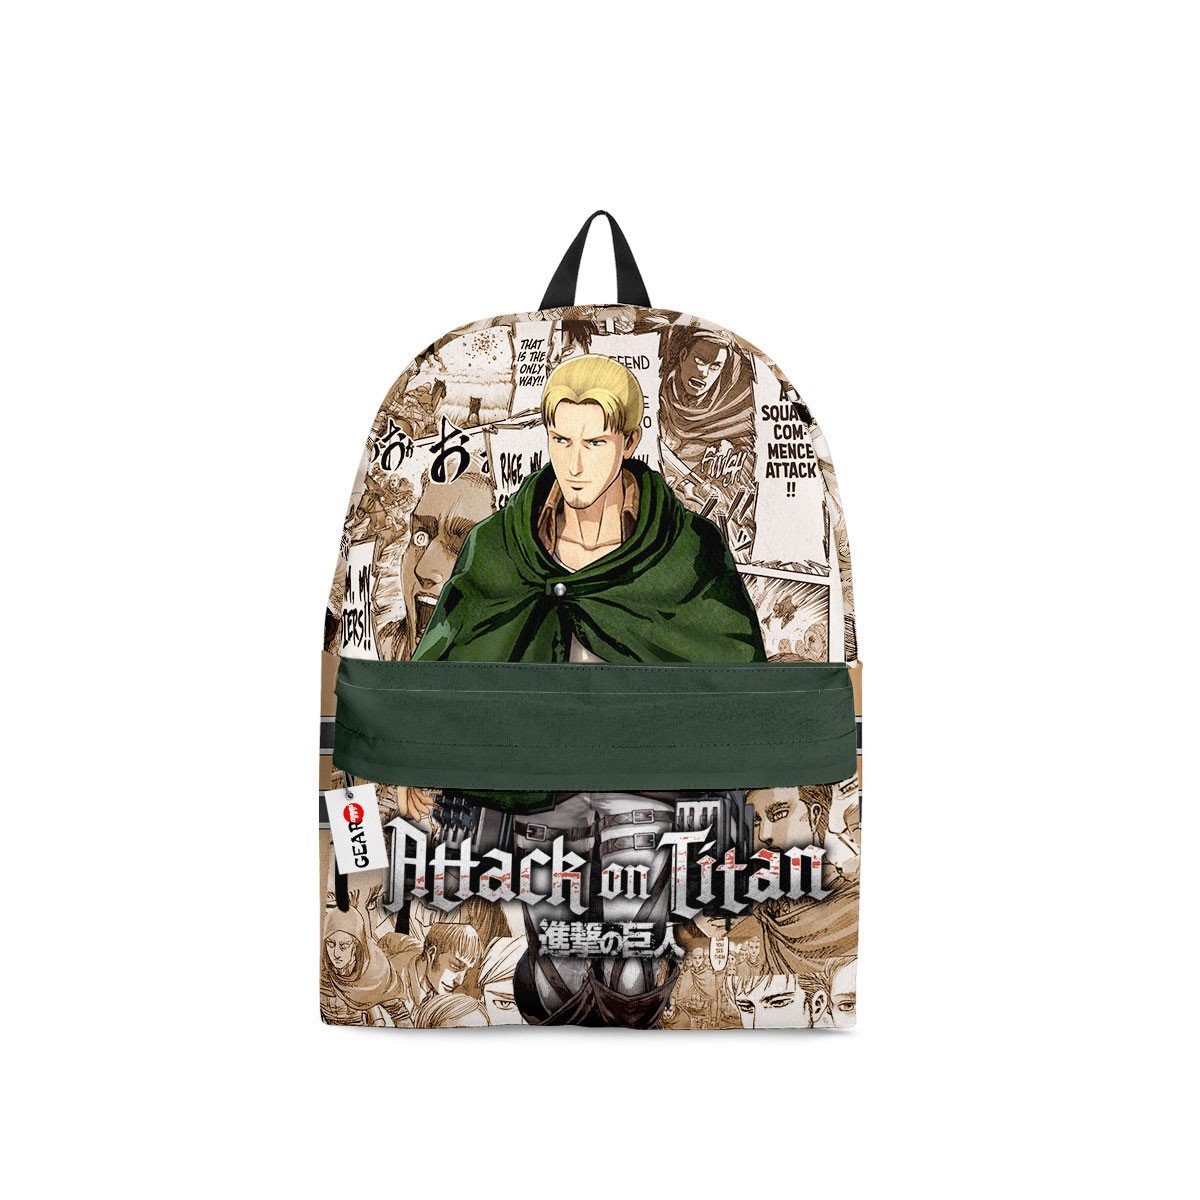 BEST Erwin Smith Attack on Titan Anime Manga Style Printed 3D Leisure Backpack